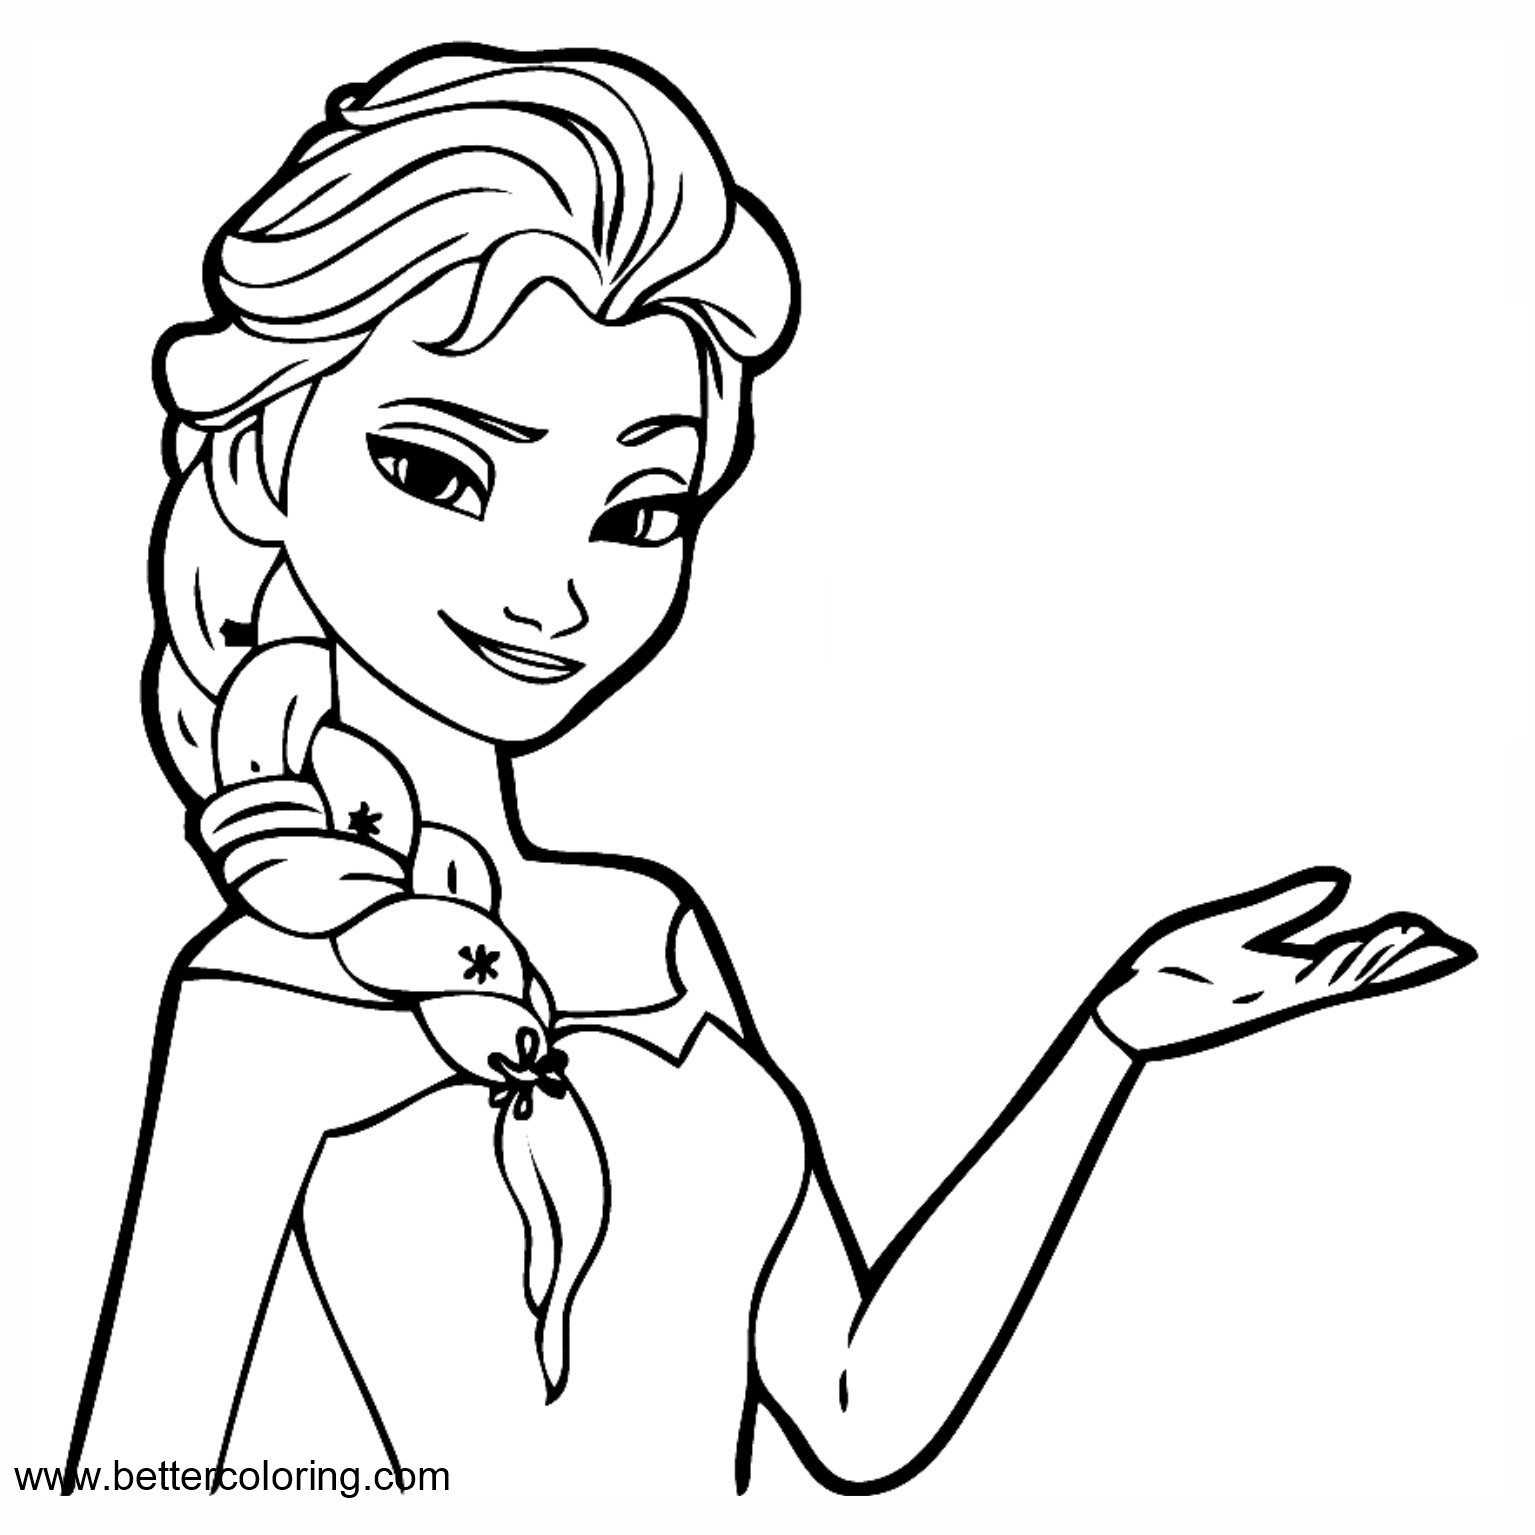 frozen coloring pages printables